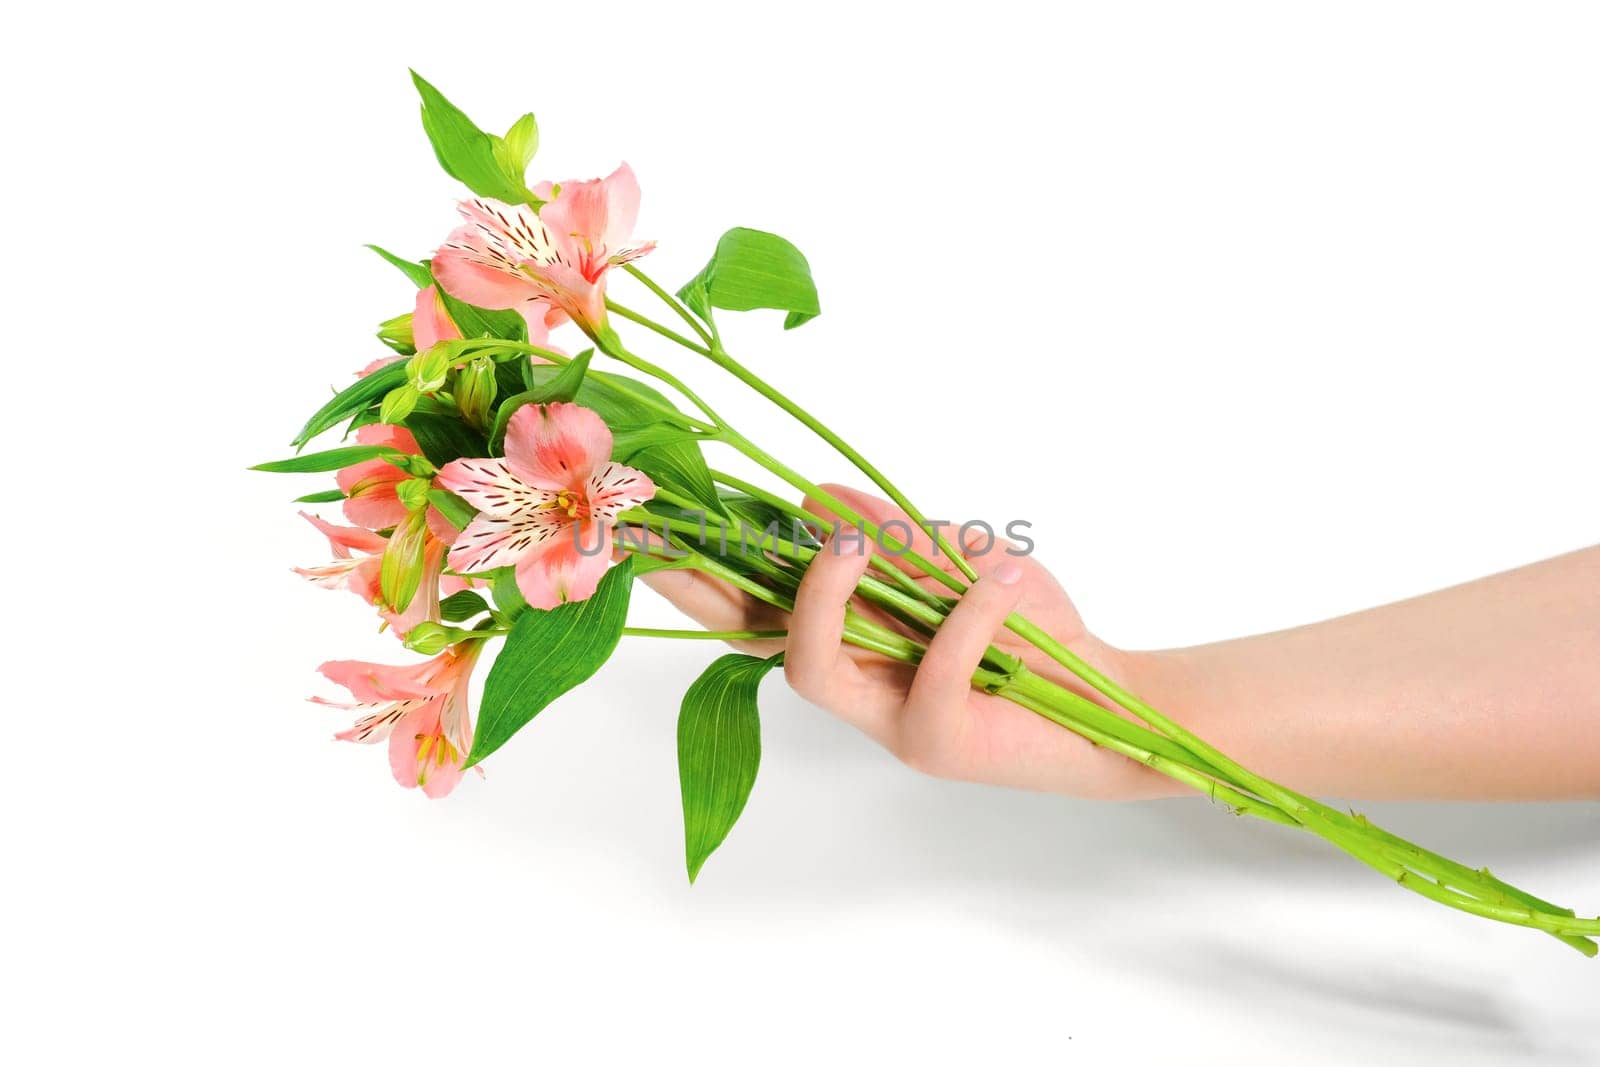 Delicate lily flowers in a female hand on a white background. Natural cosmetics, hand care products. by Shablovskyistock